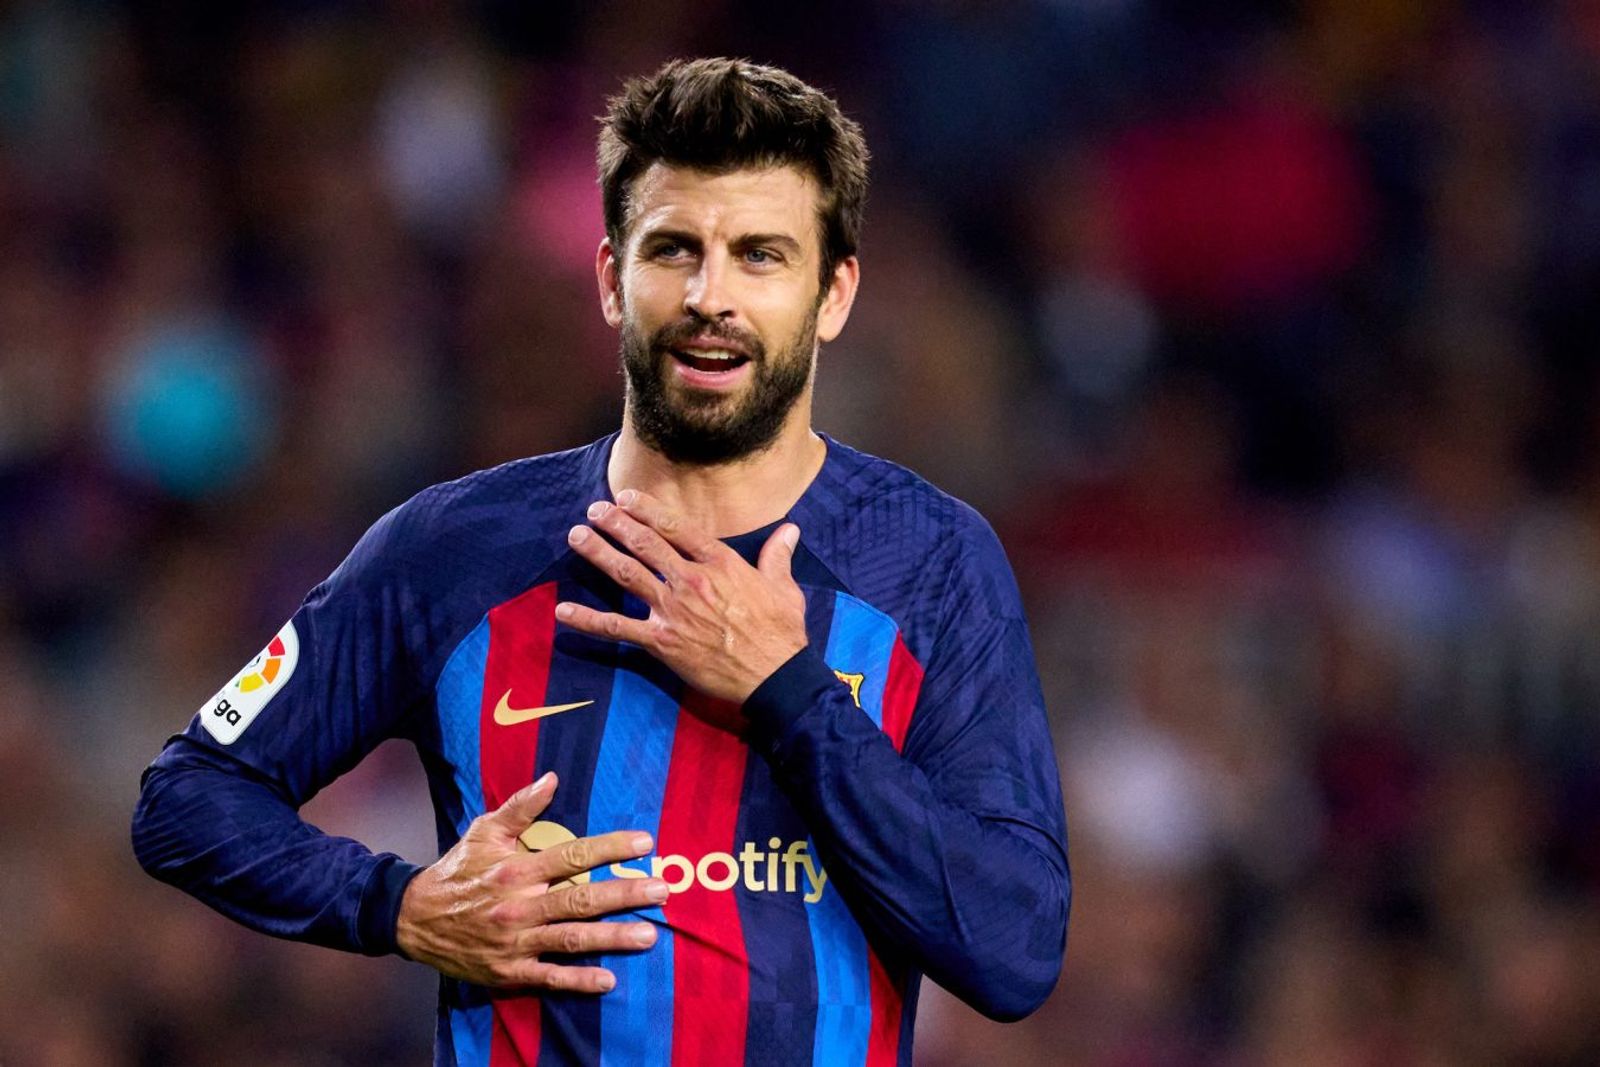 Former football player Gerard Piqué playing for Barcelona